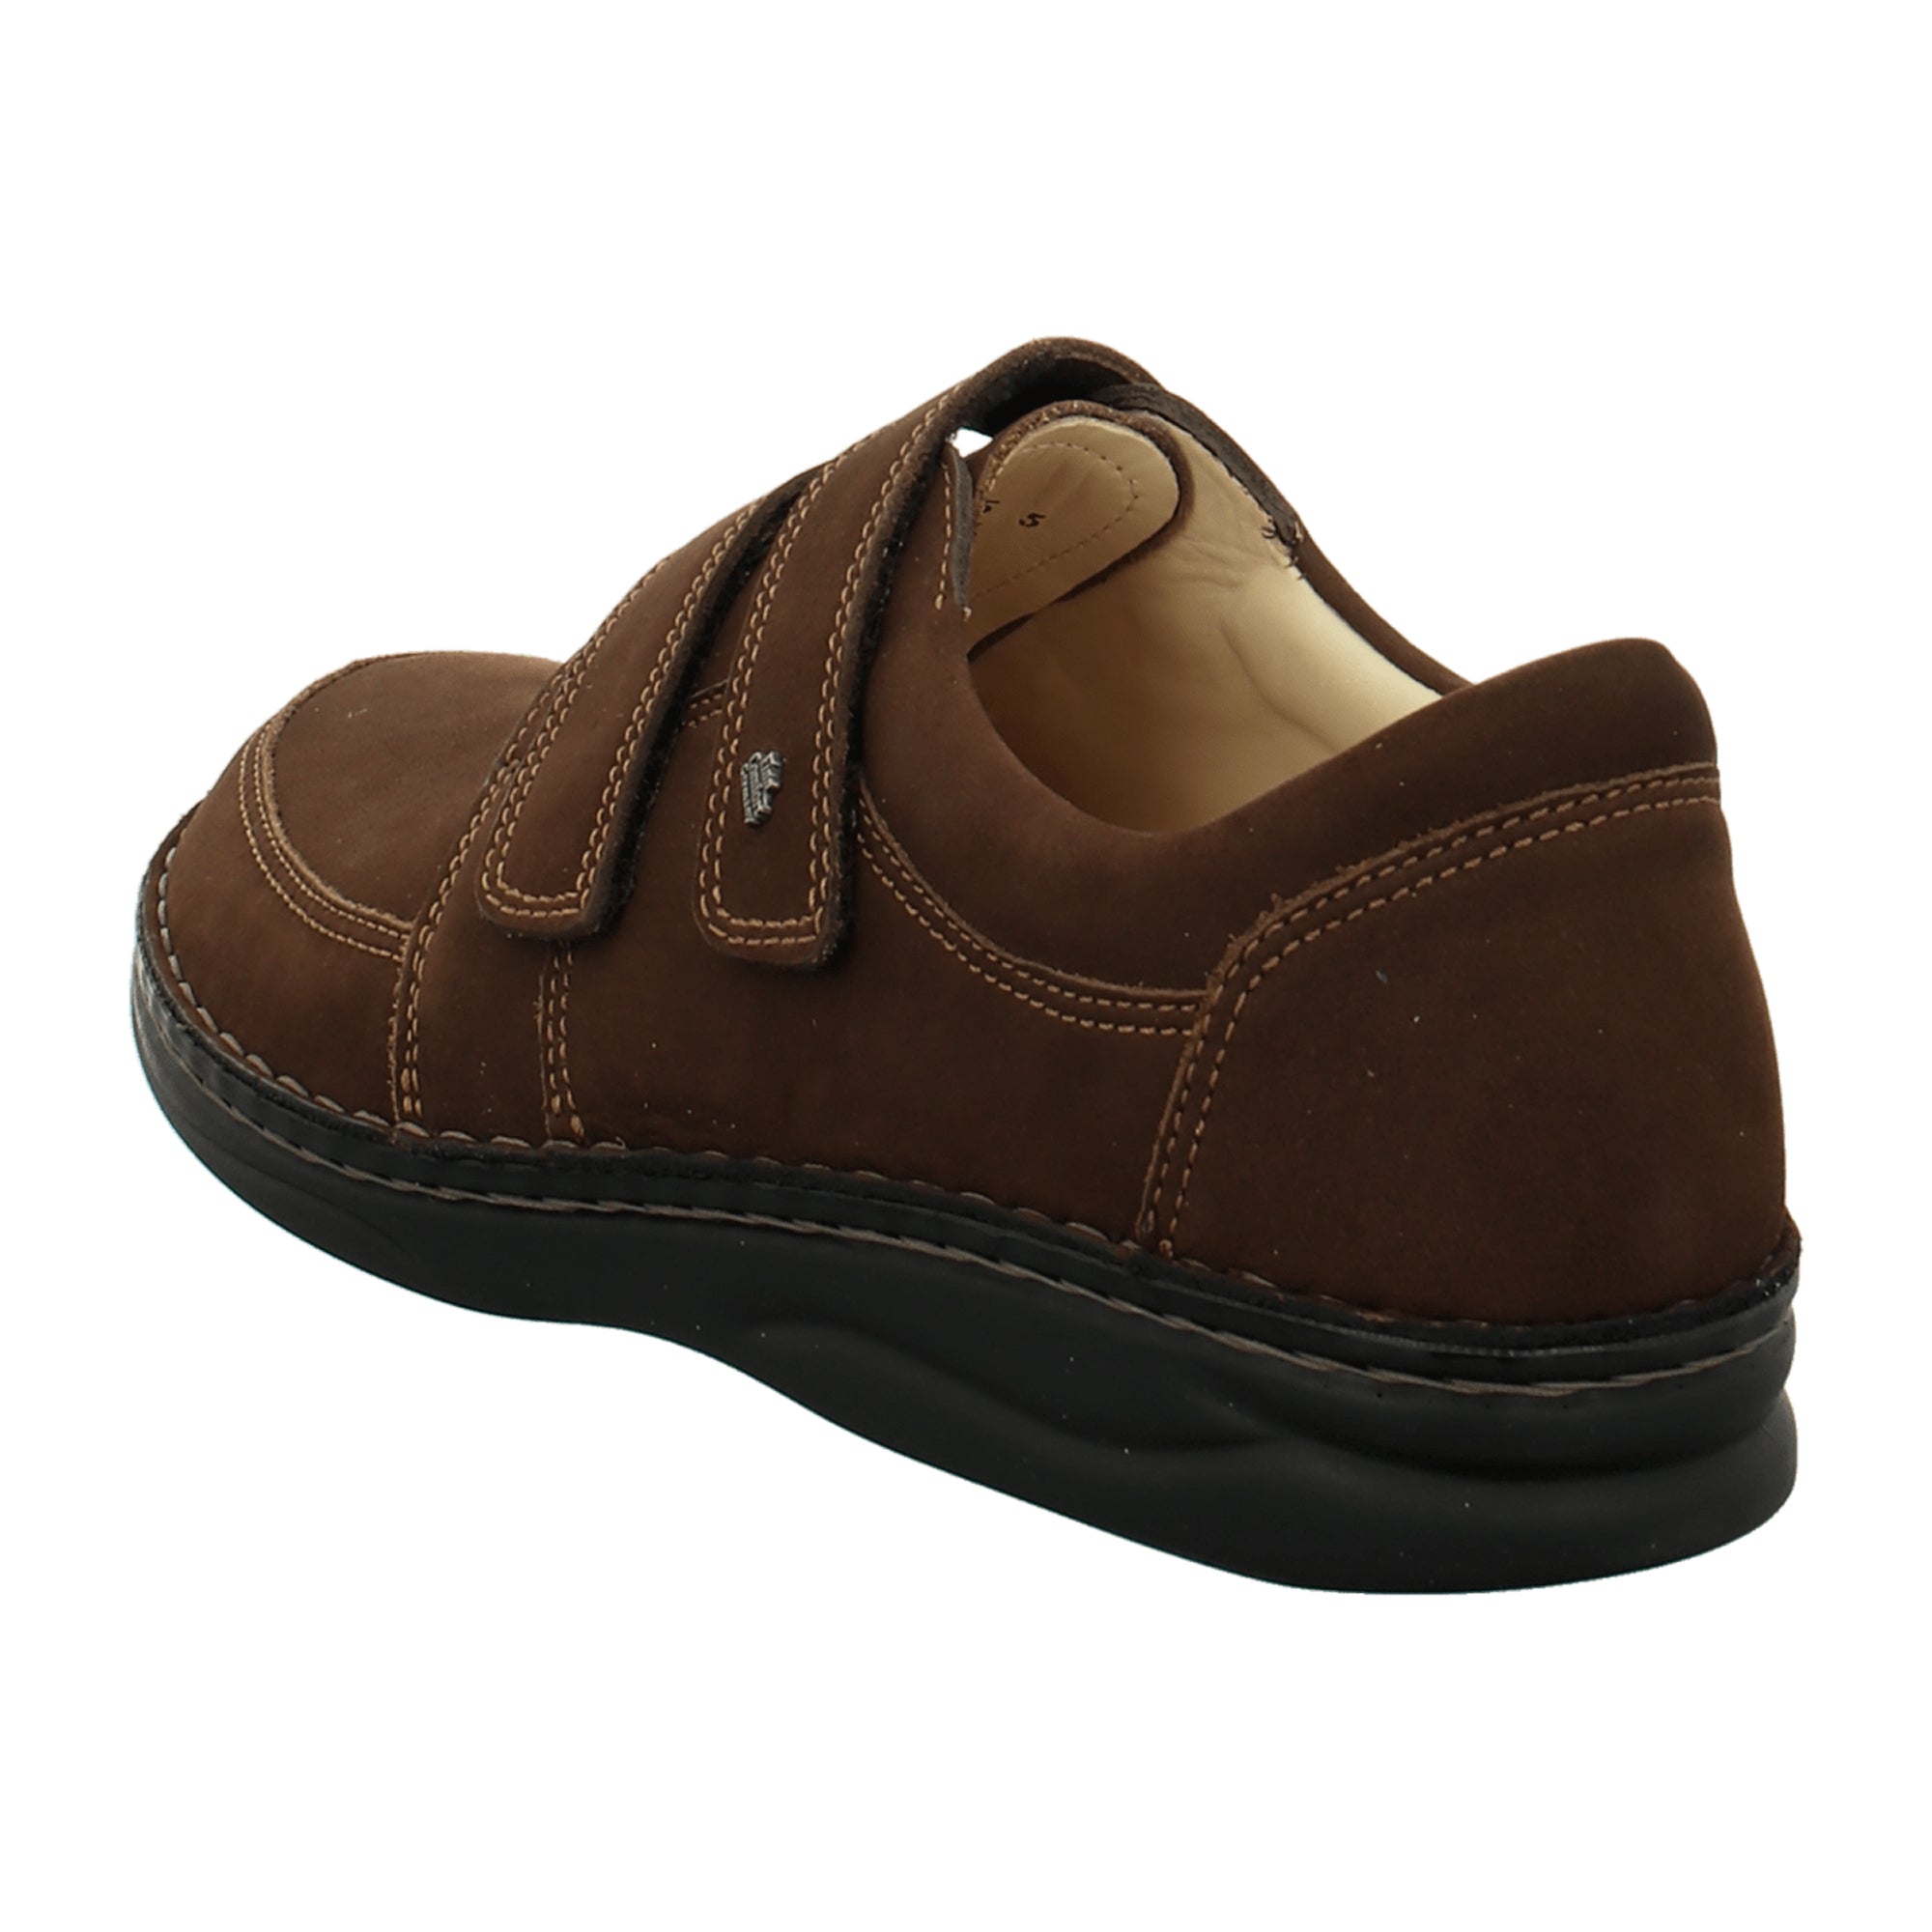 Finn Comfort Wicklow Classic Men's Shoes - Durable Leather Footwear, Brown